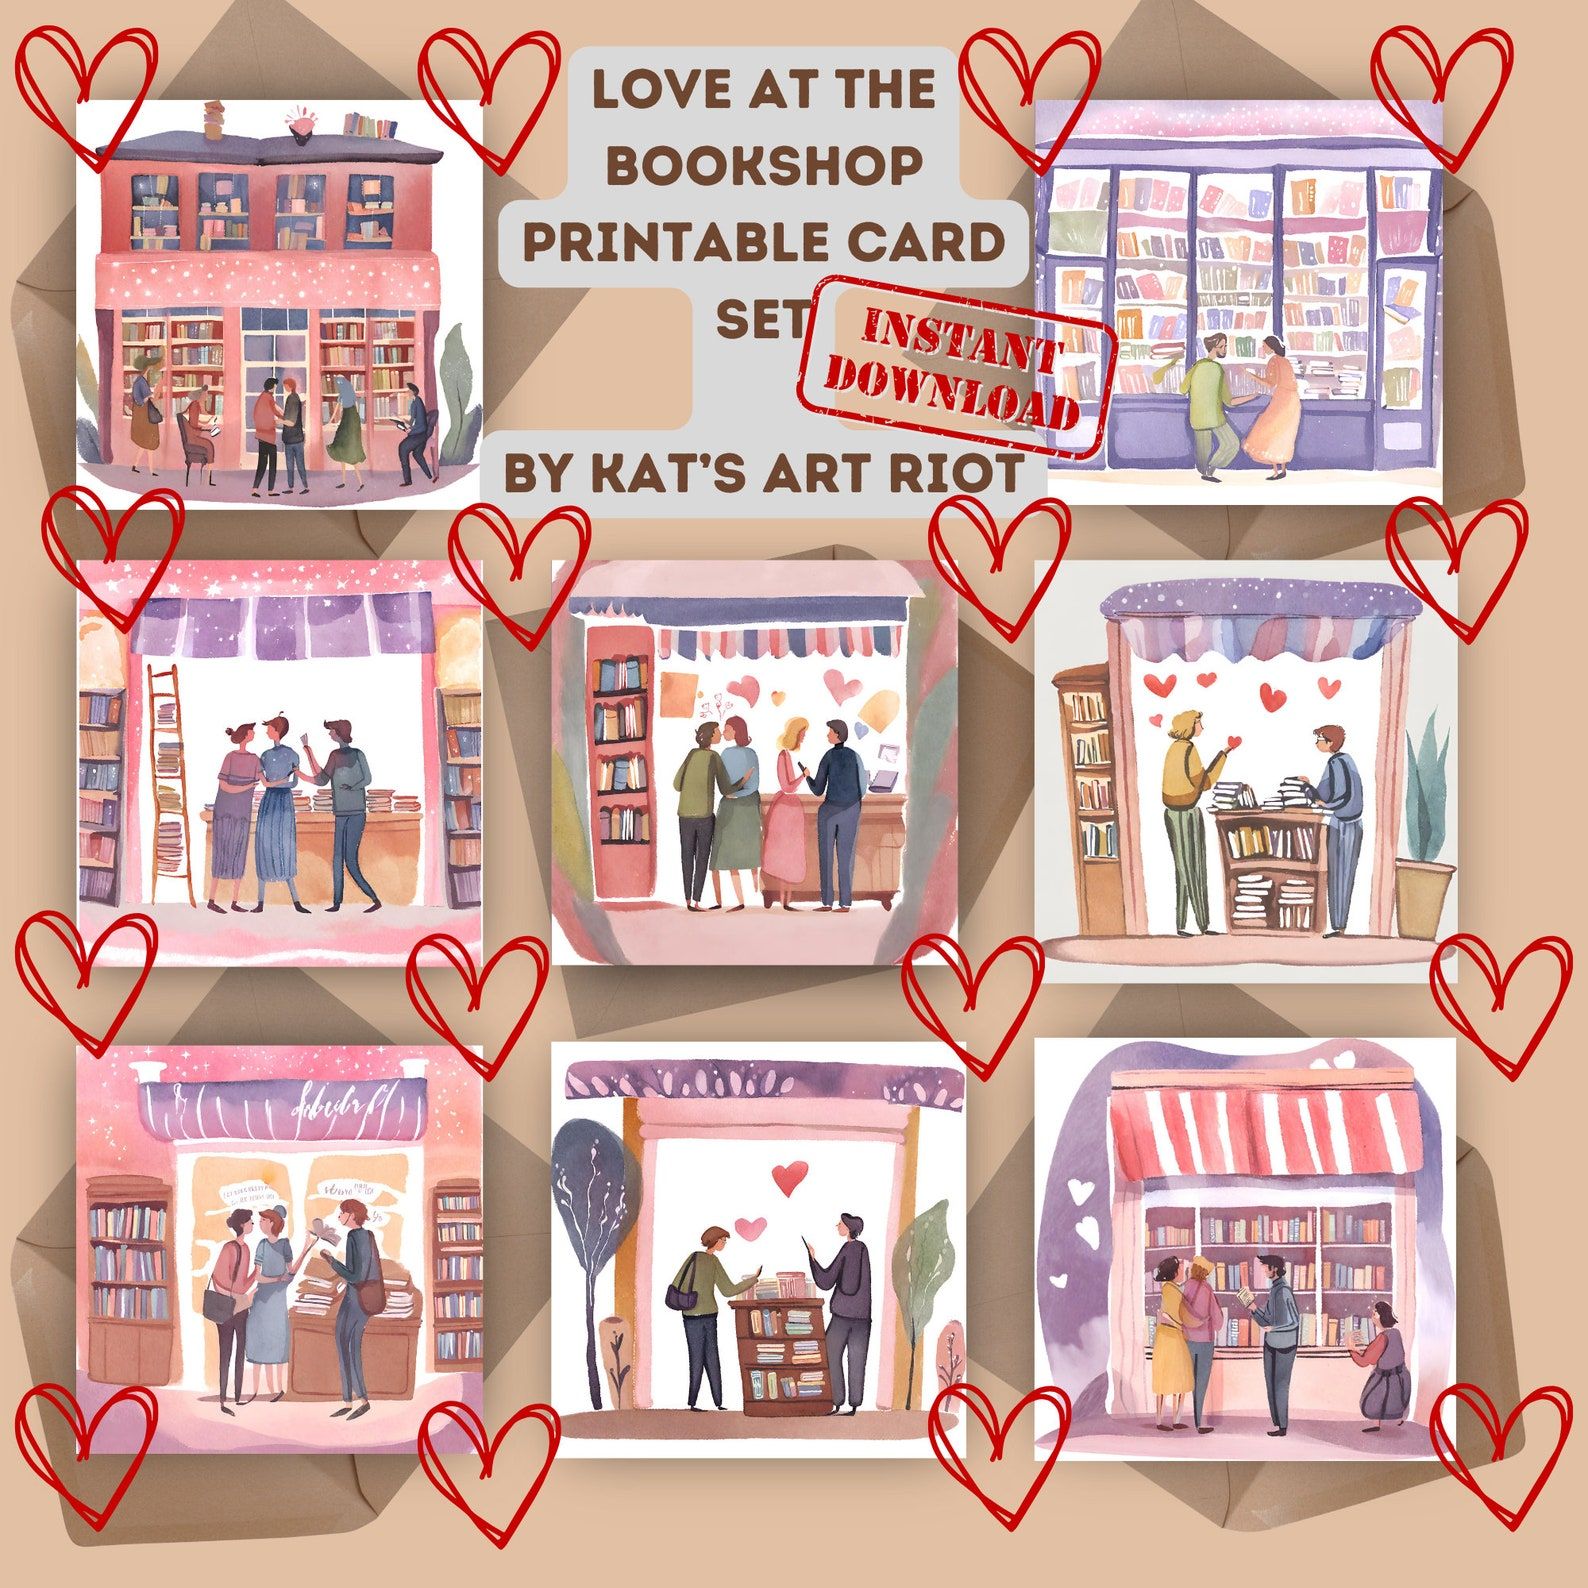 a set of eight watercolor Valentine's Day cards featuring various people finding love and connection at a bookstore